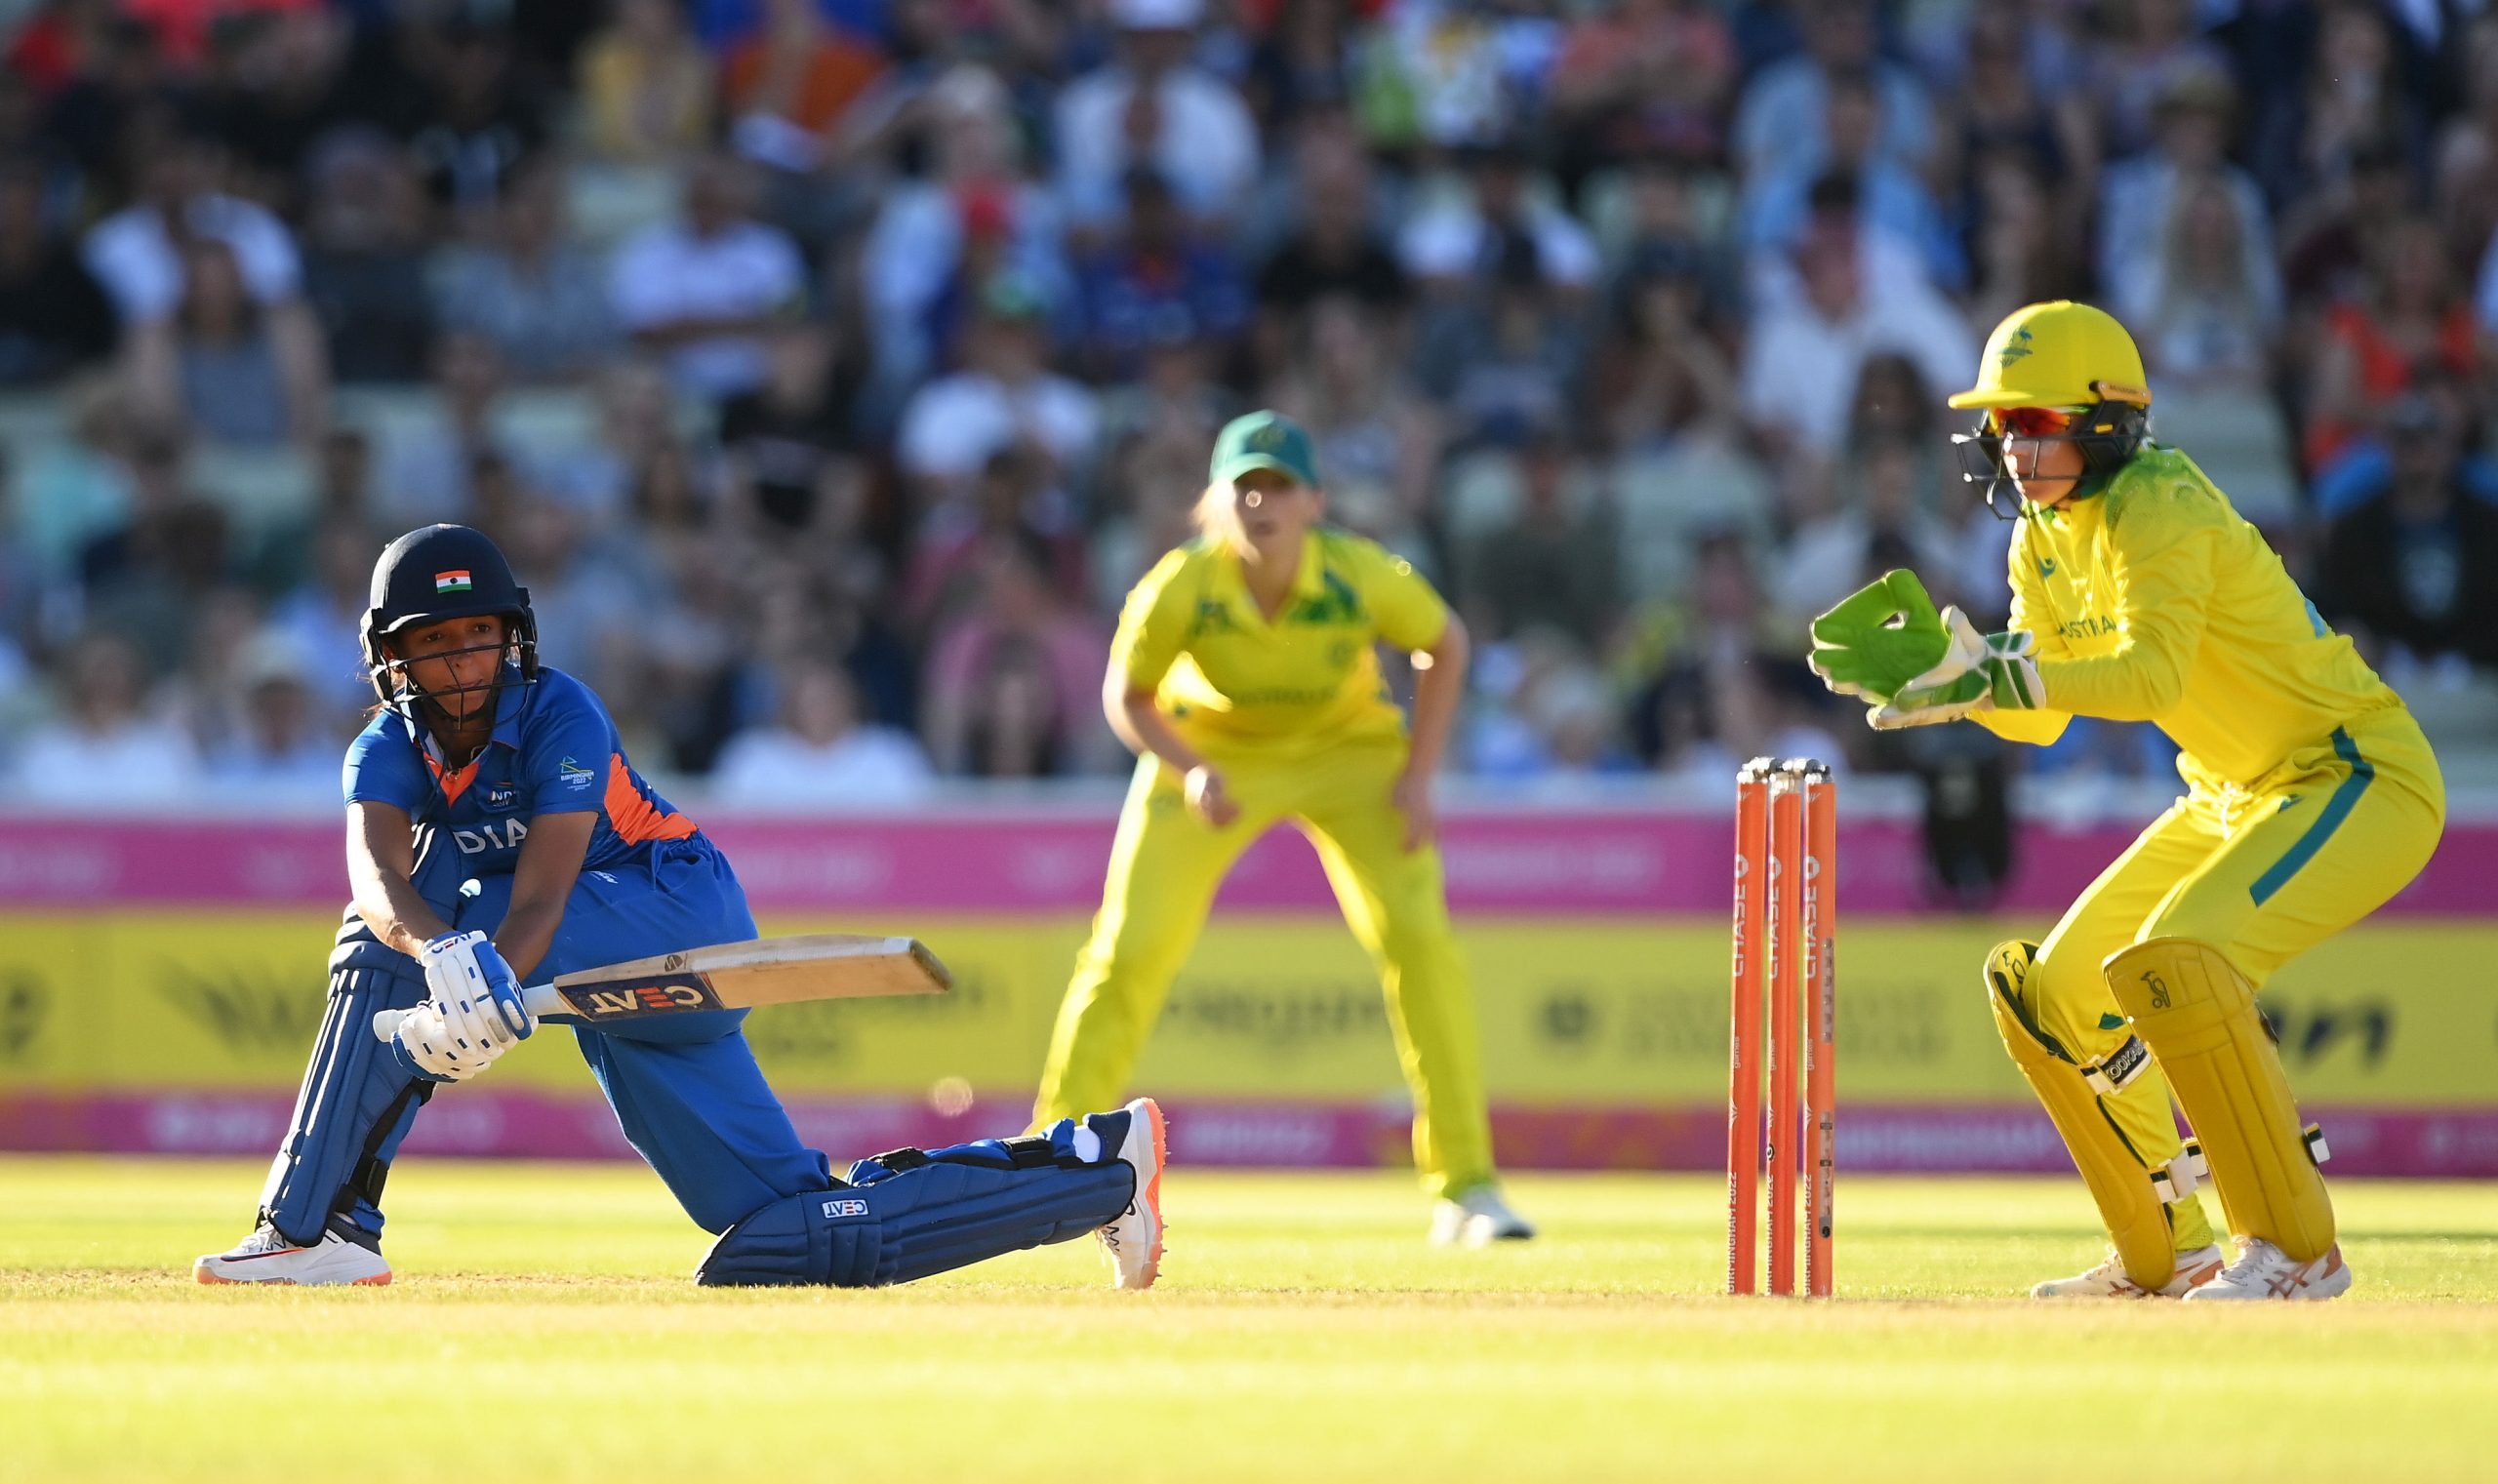 ‘Love for cricket to be in an Olympics’, declares cricketers after Commonwealth Games showing